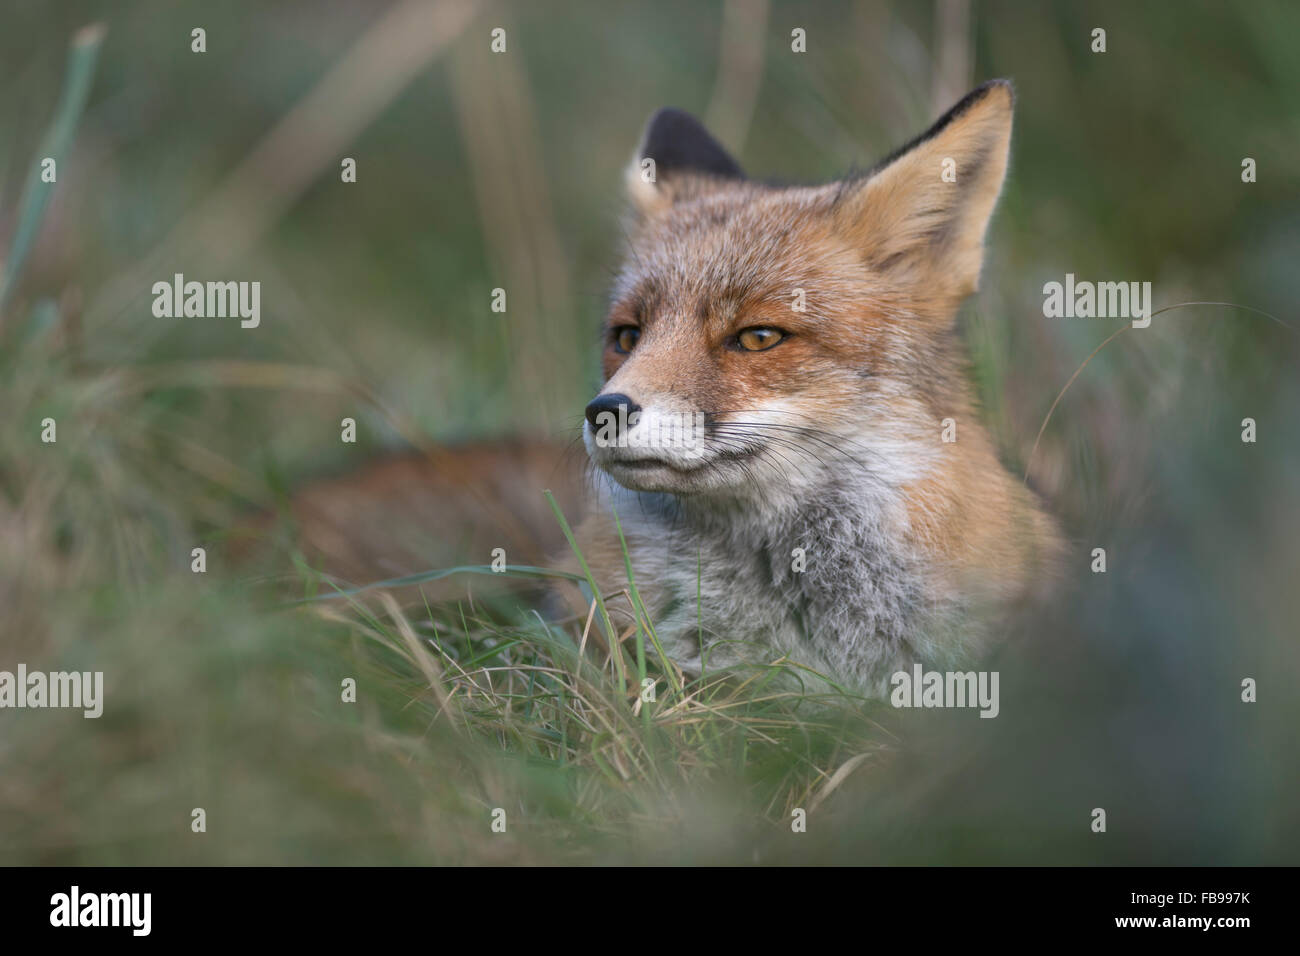 Red Fox / Rotfuchs ( Vulpes vulpes ) rests during daytime in high grass, looks suspicious, close up. Stock Photo